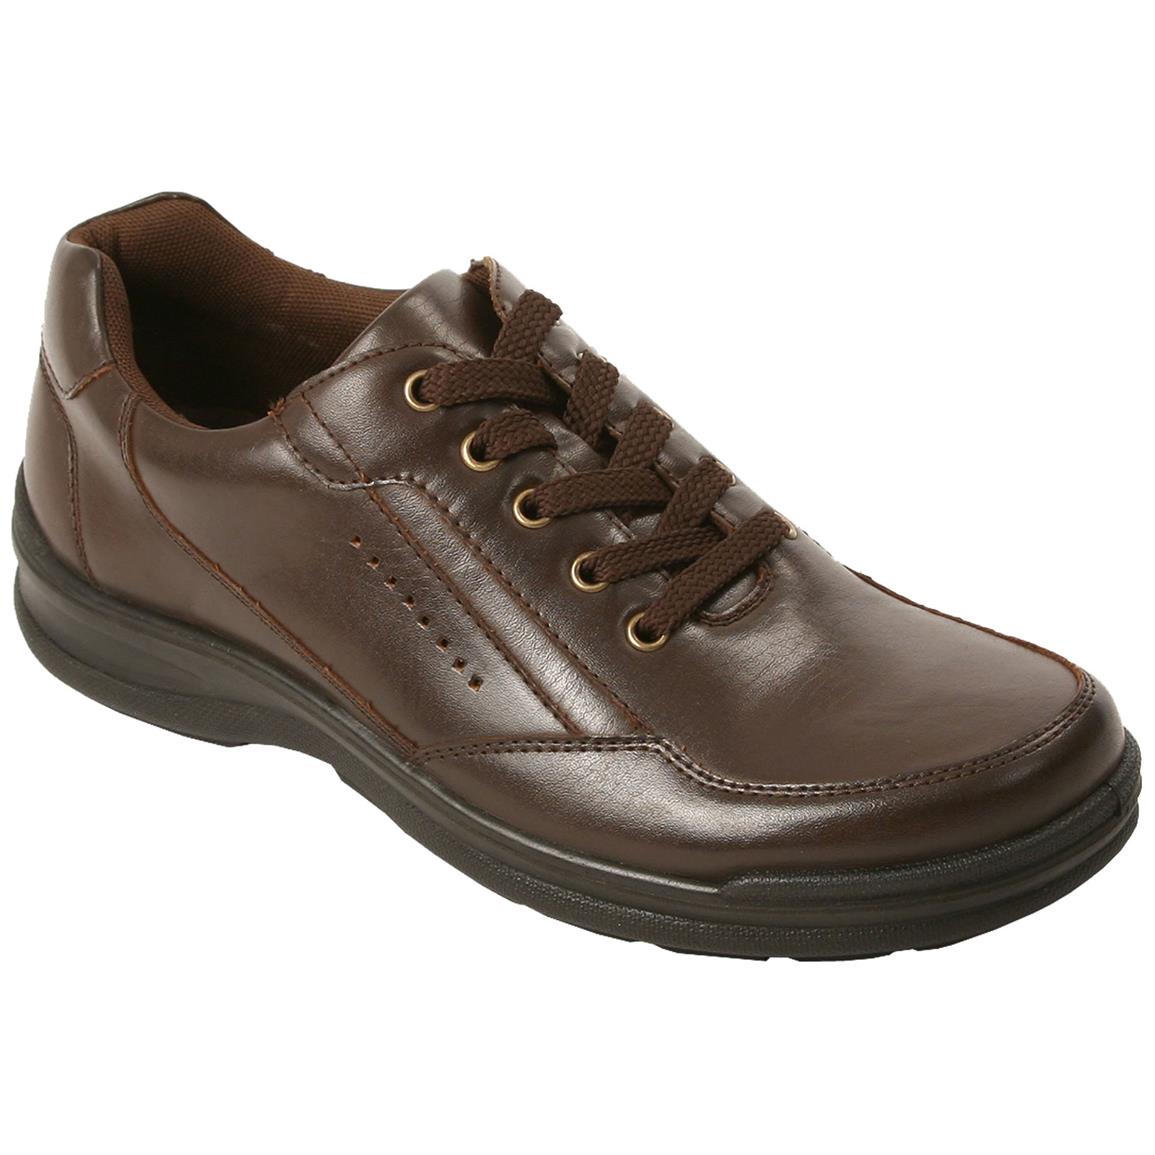 Deer Stags 902 Beam Oxford Shoes - 626024, Casual Shoes at Sportsman's ...